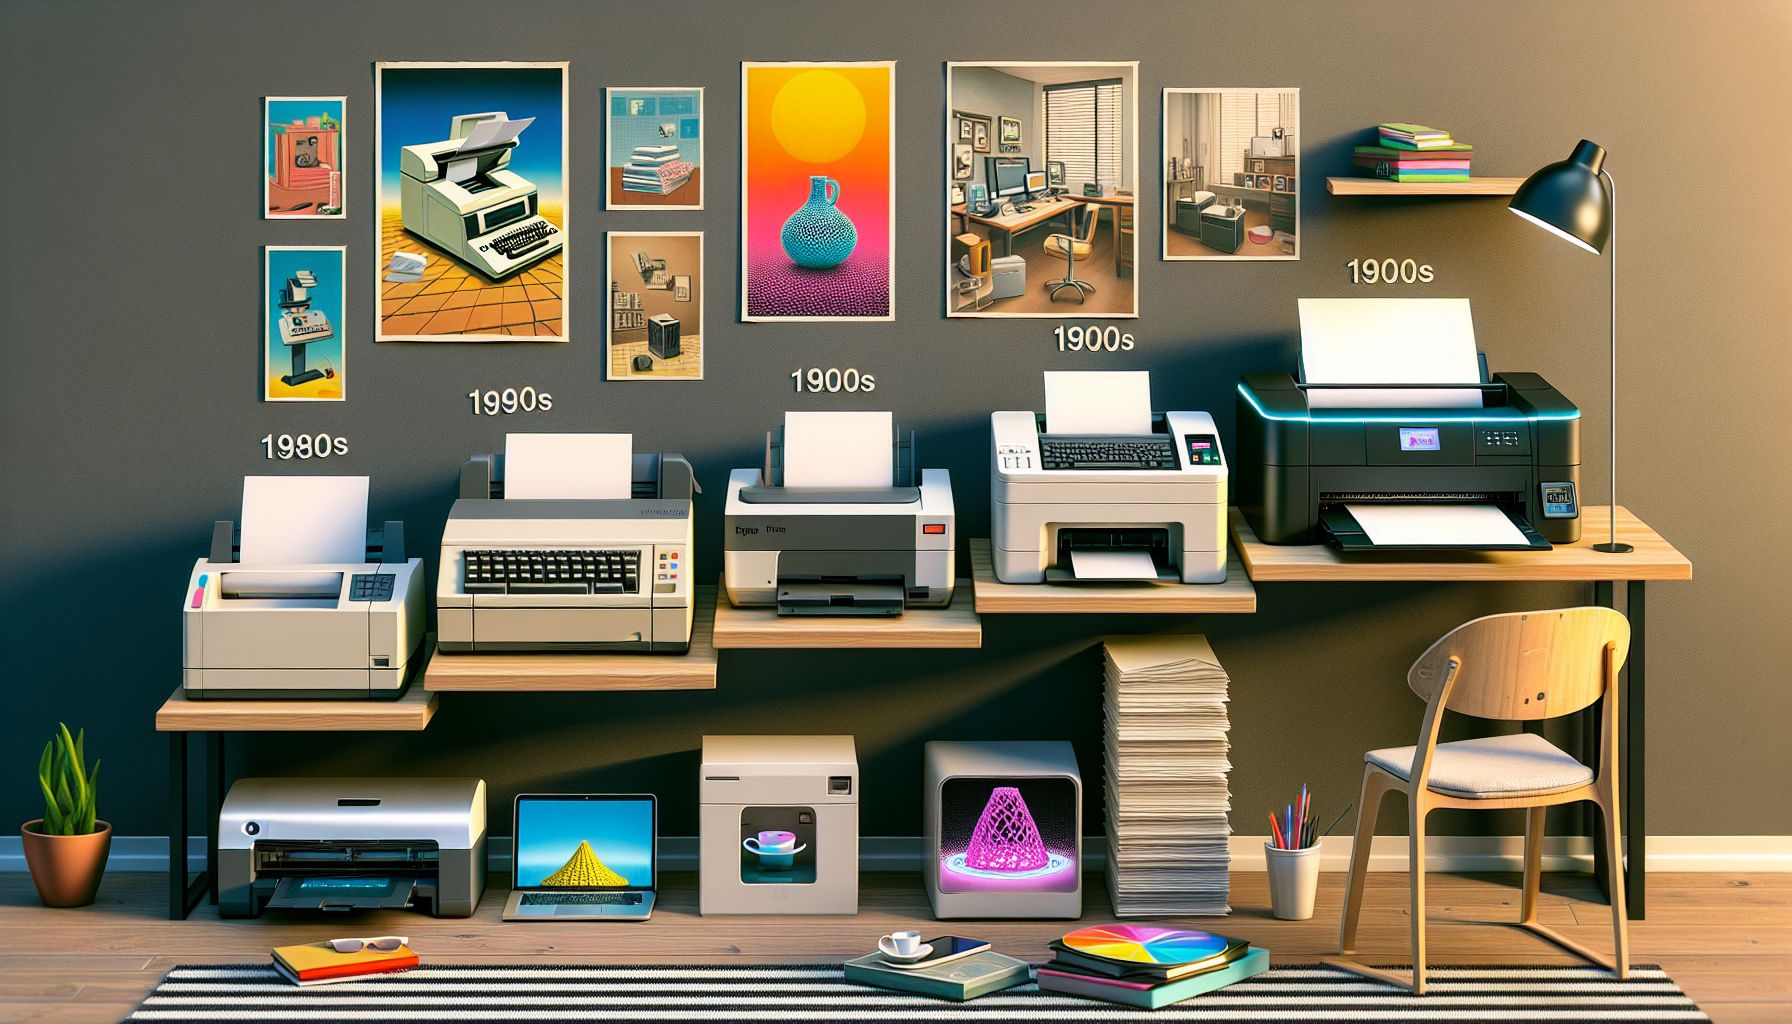 The Evolution of Printers: From Dot Matrix to 3D Printing